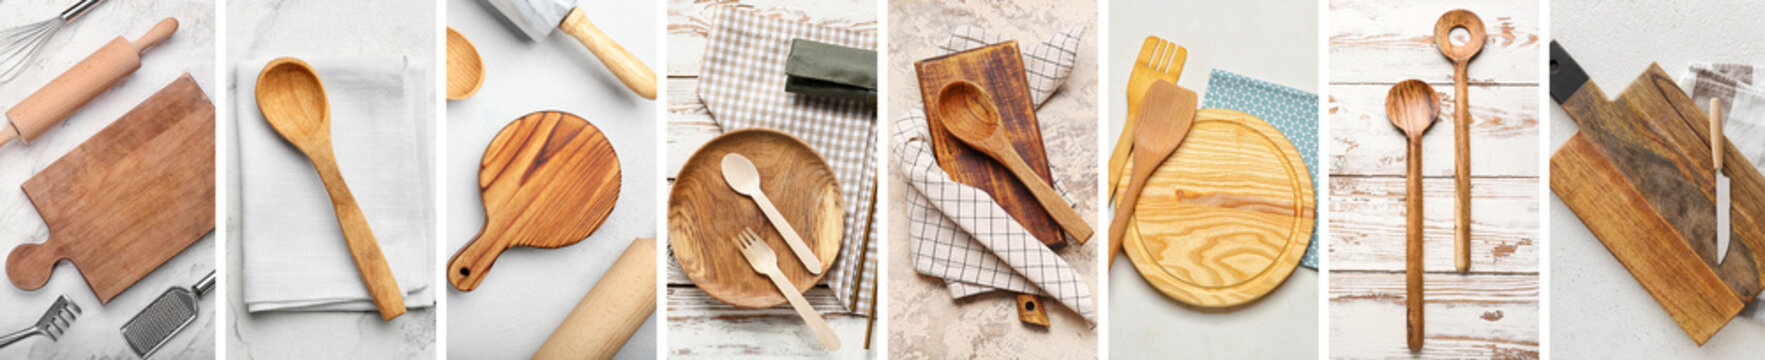 Set of eco wooden kitchen supplies on light background